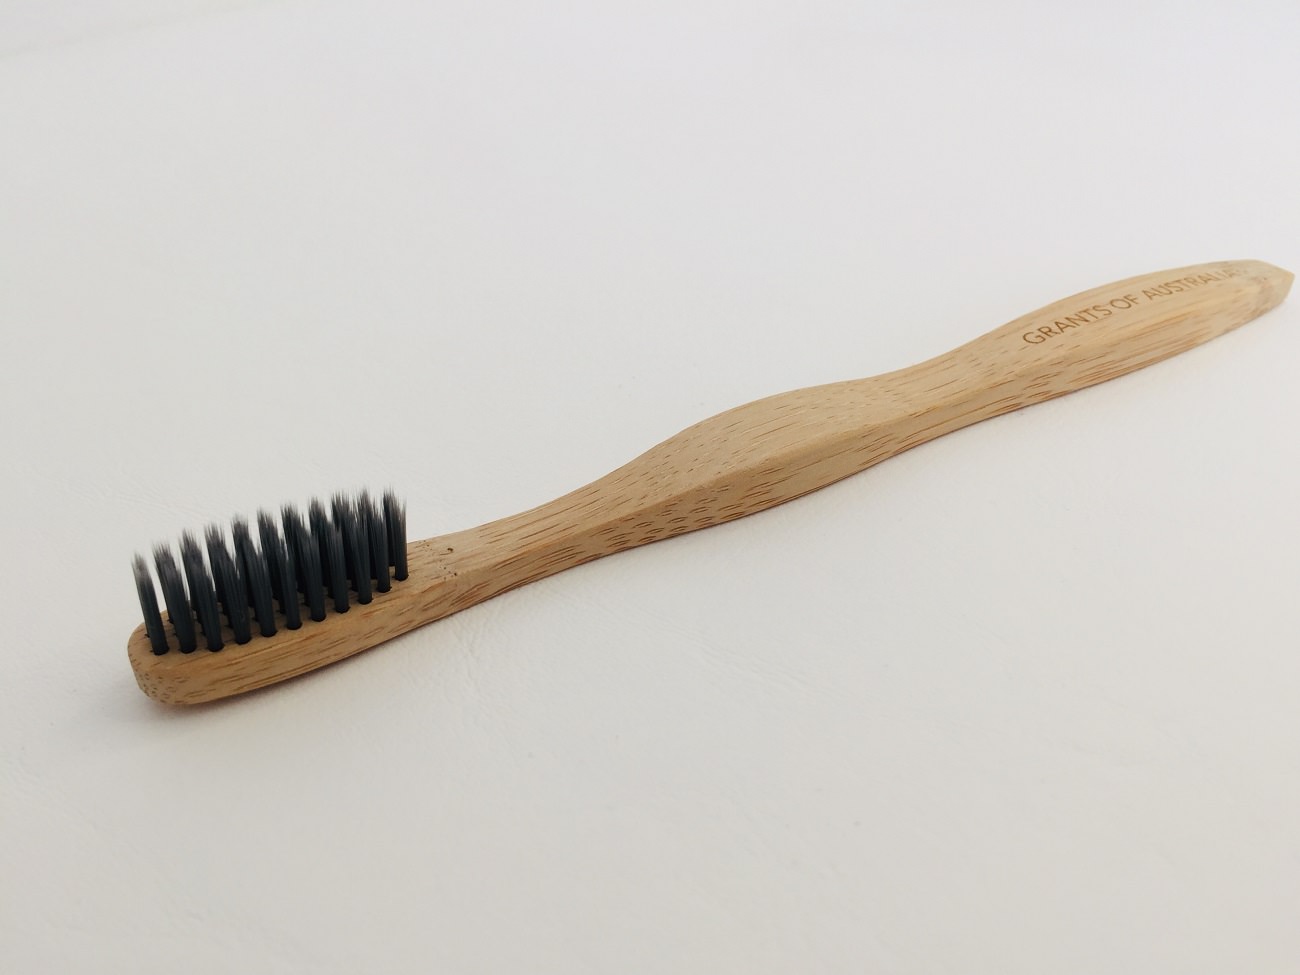 The Grants of Australia Bamboo Charcoal Infused Ultra Soft Toothbrush